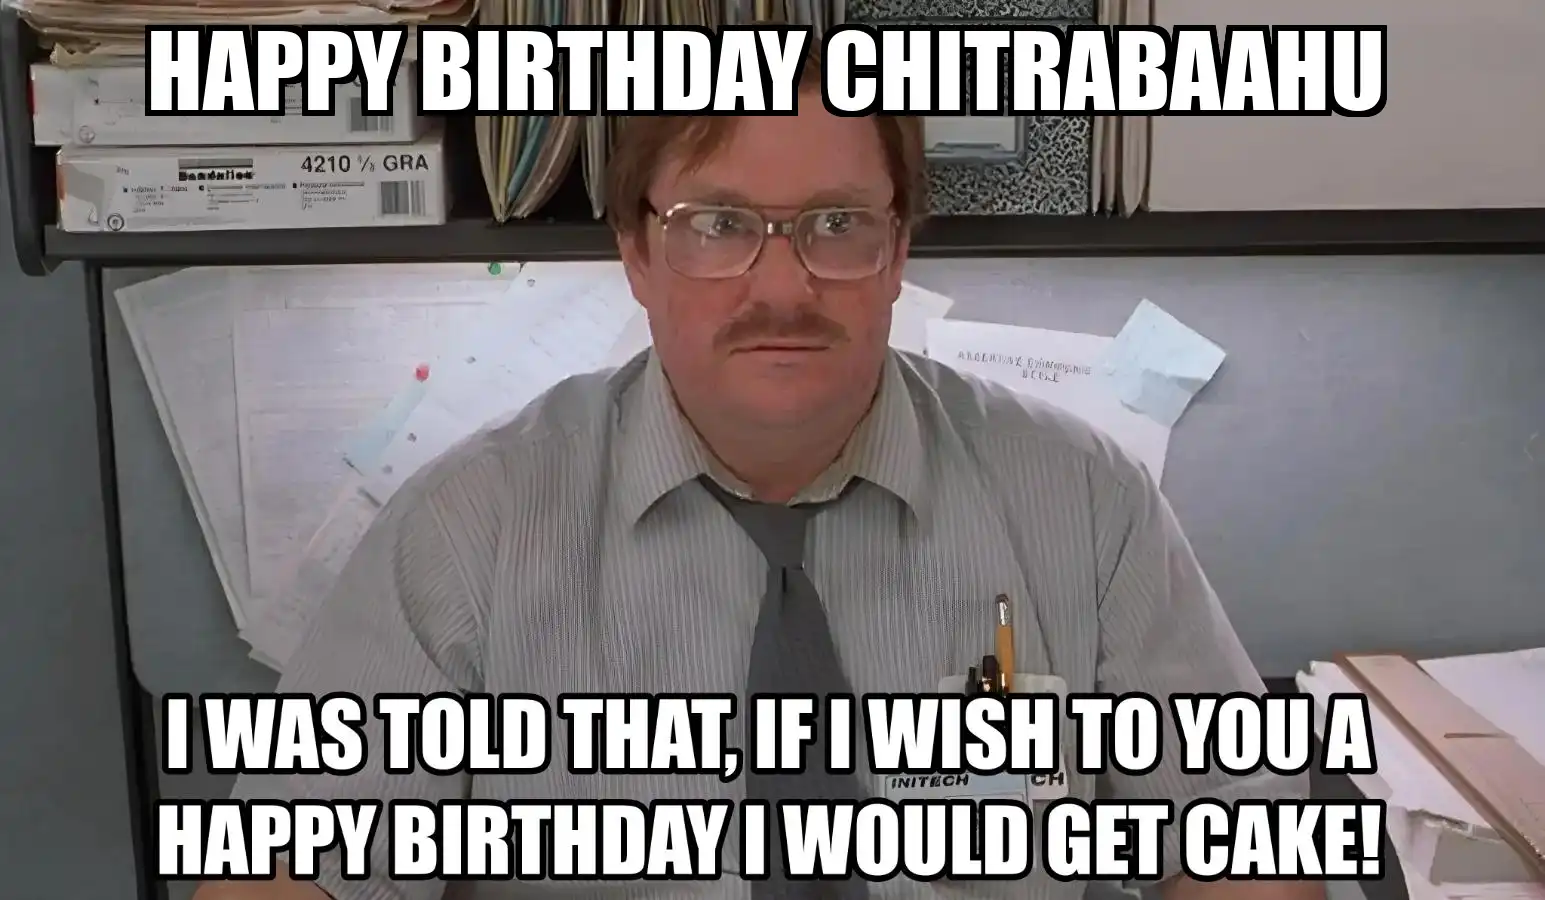 Happy Birthday Chitrabaahu I Would Get A Cake Meme